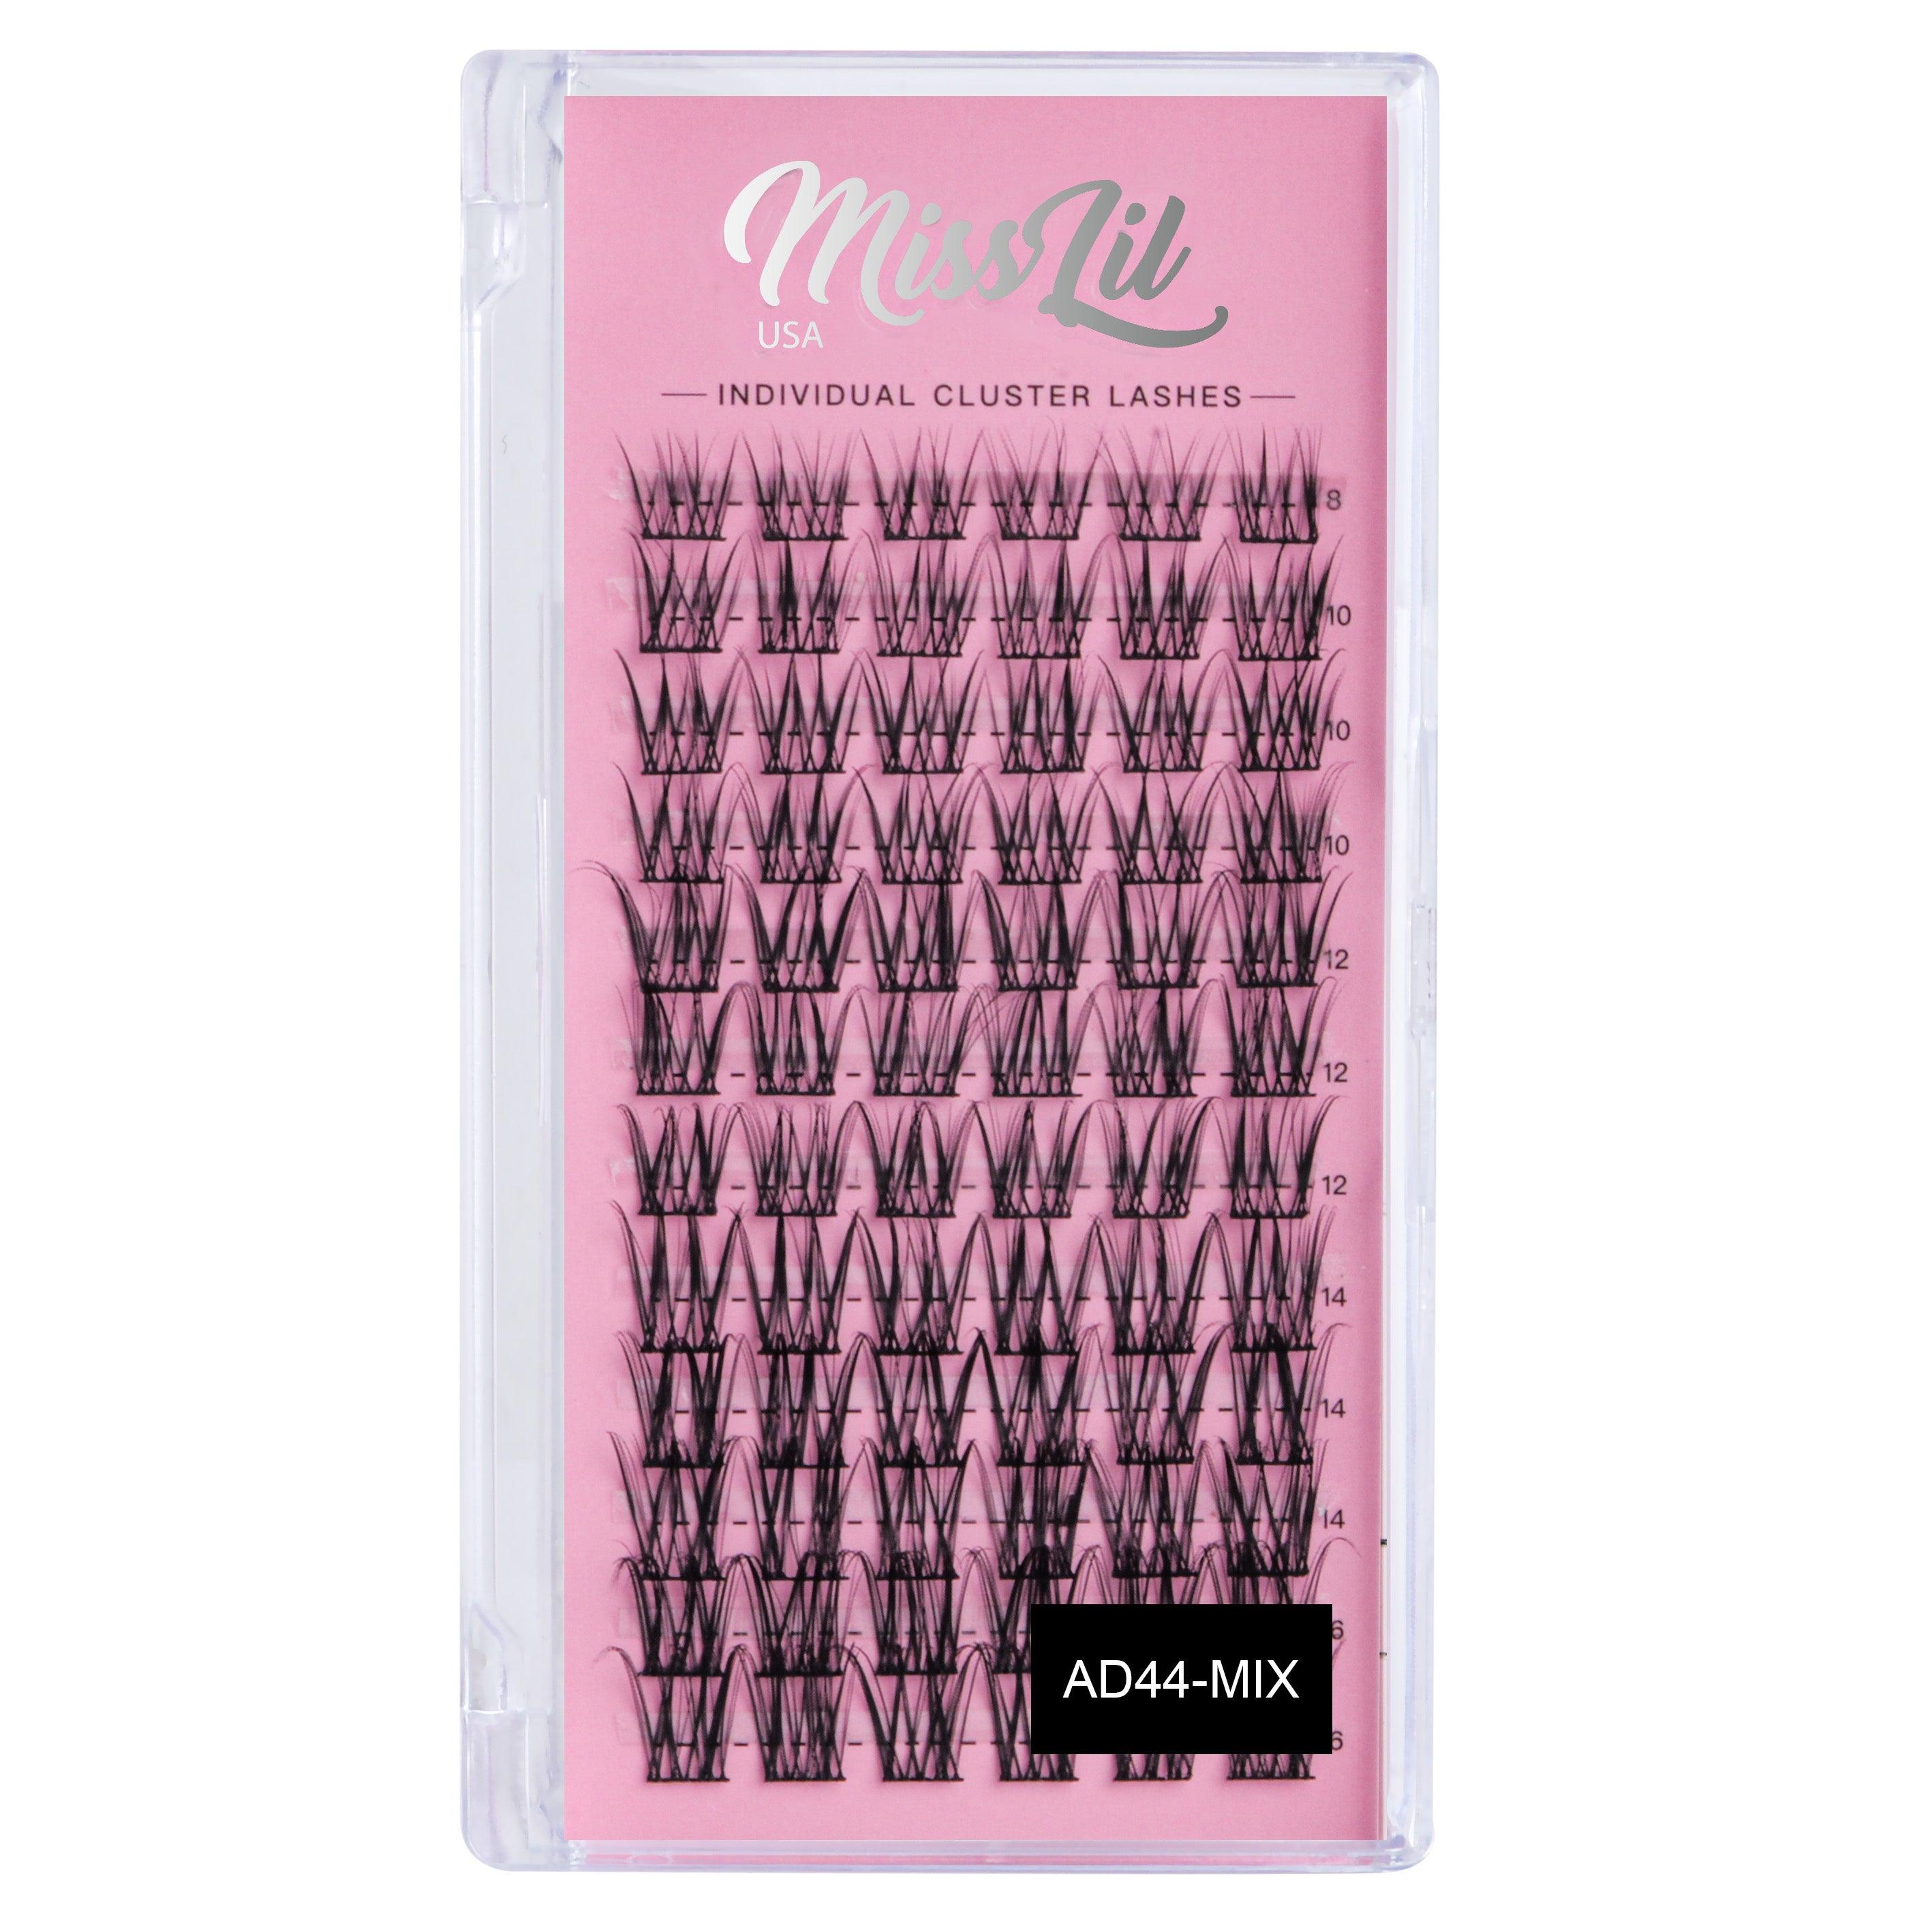 DIY Individual Cluster lashes AD-44 Small MIX Tray - Miss Lil USA